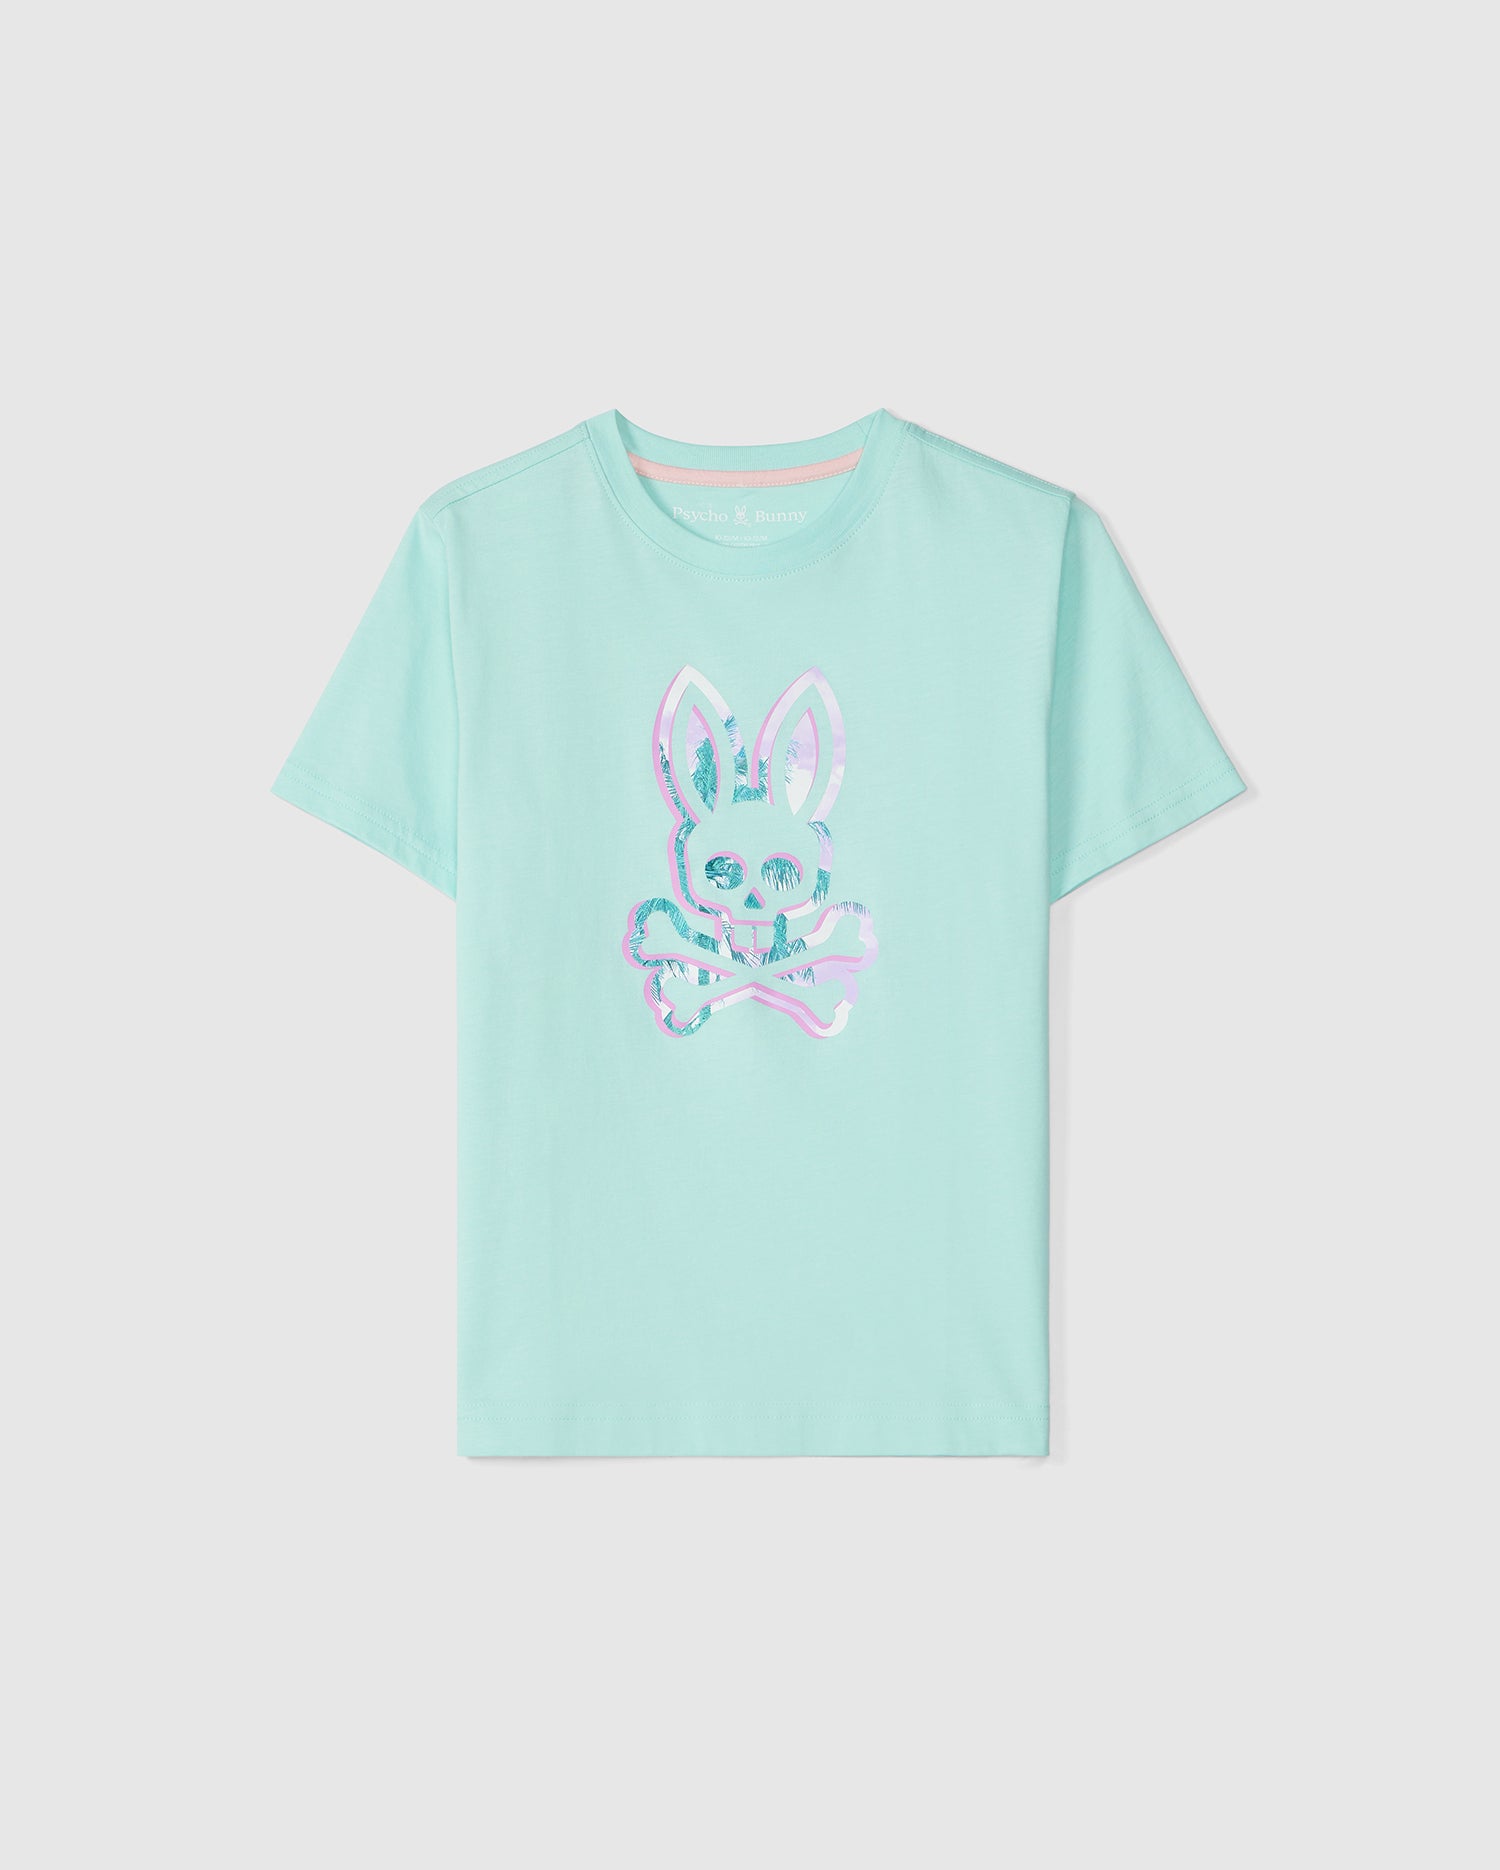 A light blue KIDS LEONARD GRAPHIC TEE - B0U609C200 from Psycho Bunny with an embroidered design of a stylized white and pink bunny face, featuring large expressive eyes and a small nose, set against a plain background.